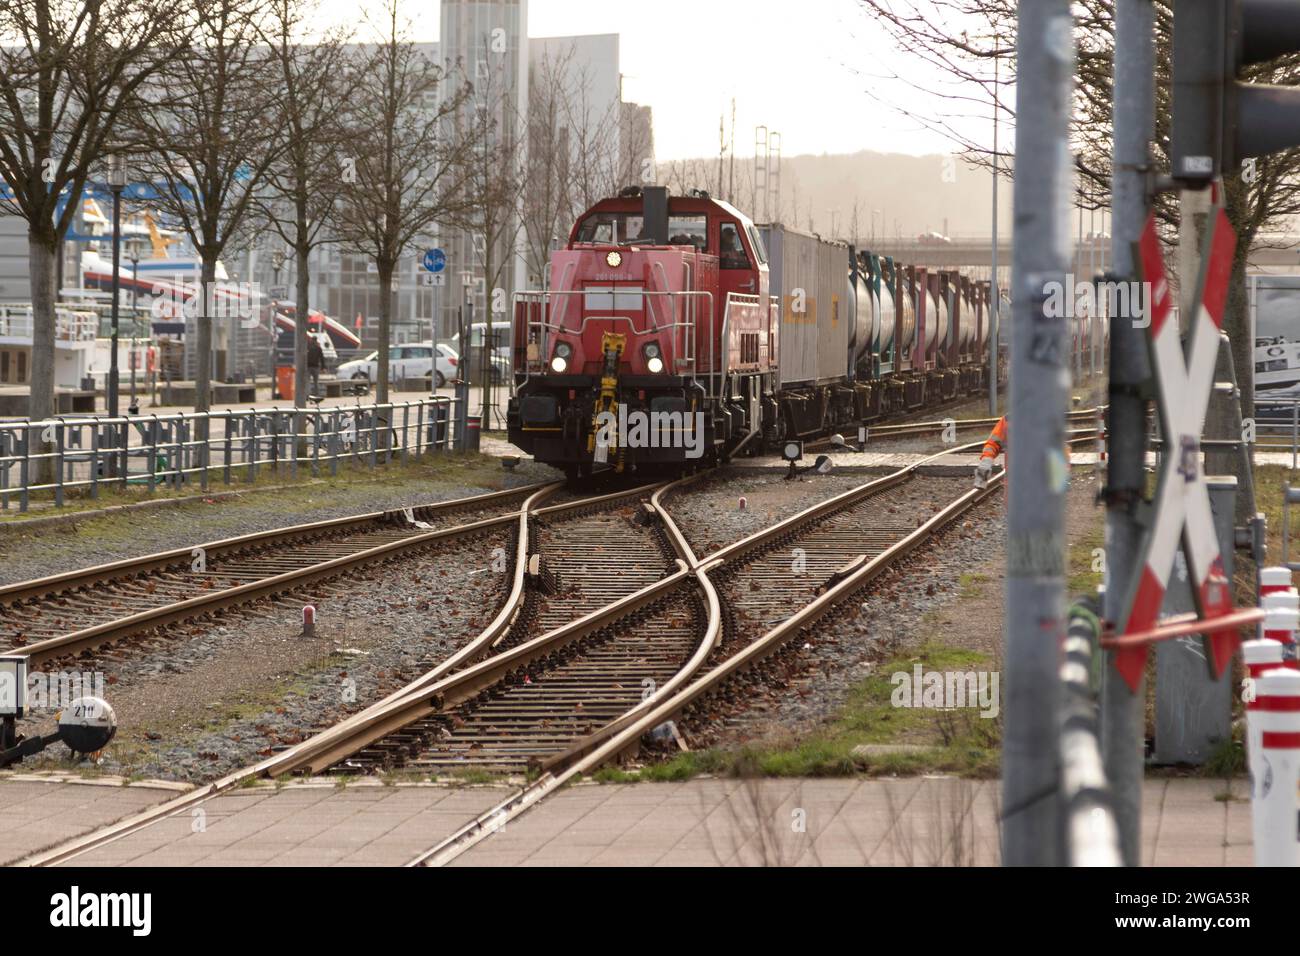 Symbolic image logistics, freight transport, railway tracks with locomotive and freight wagons of Deutsche Bahn in the harbour at Kiel Fjord, Baltic Stock Photo